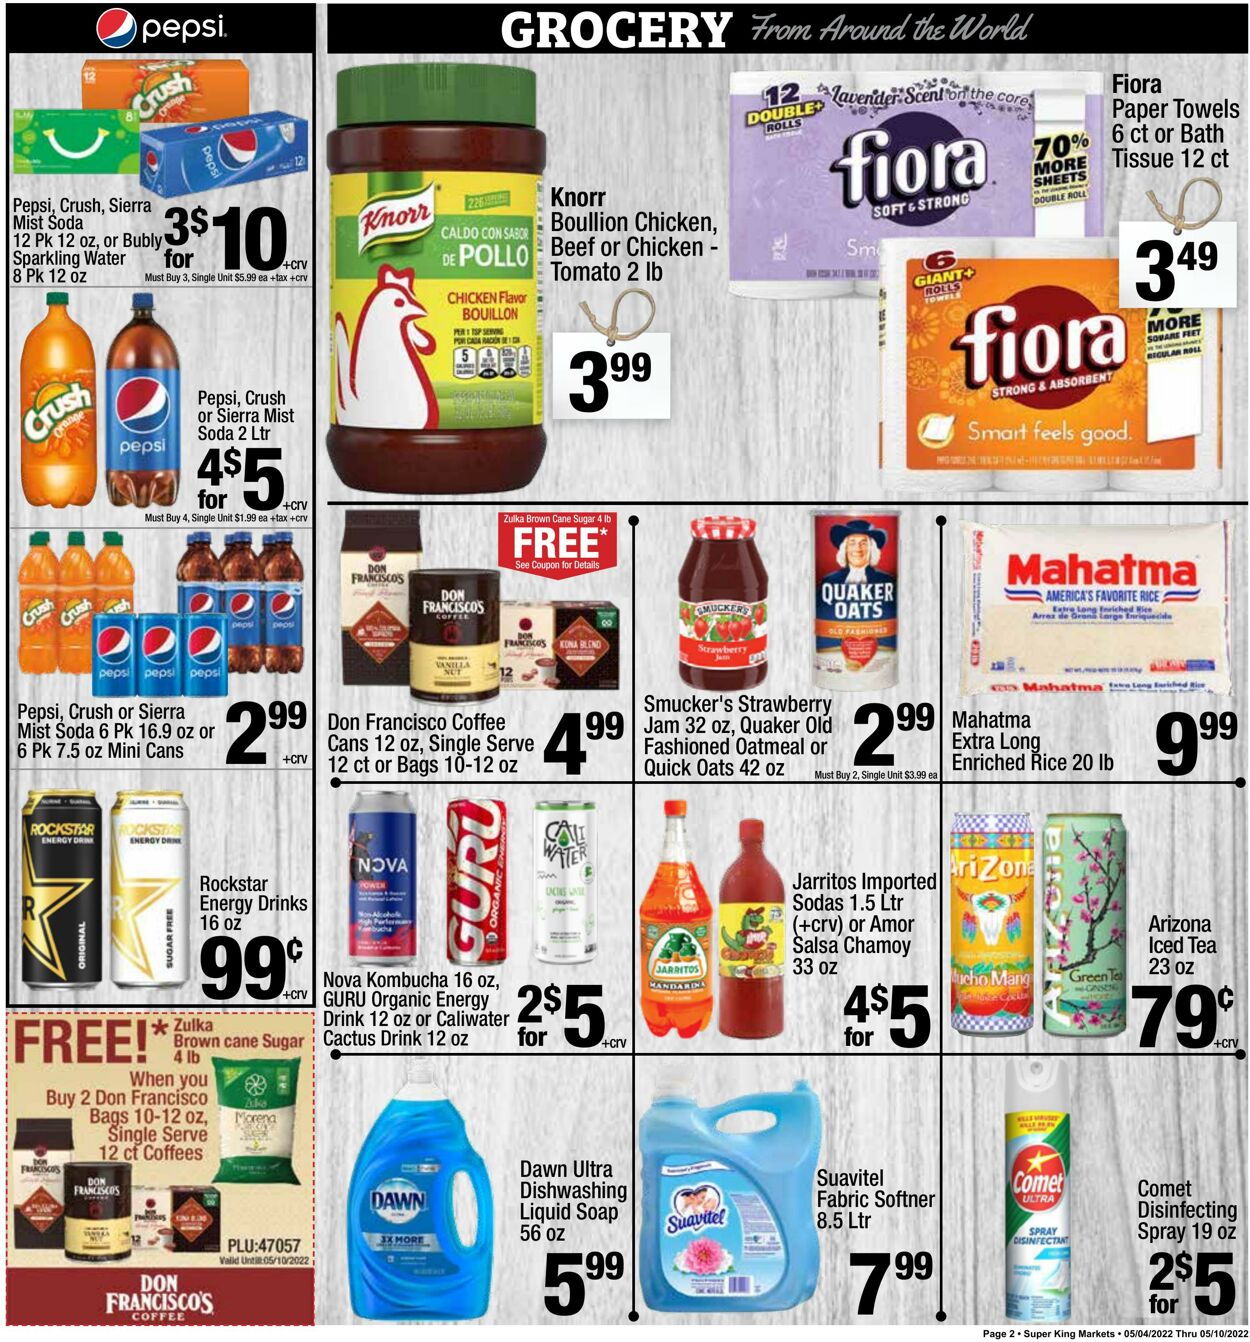 Weekly ad Super King Markets 05/04/2022 - 05/10/2022